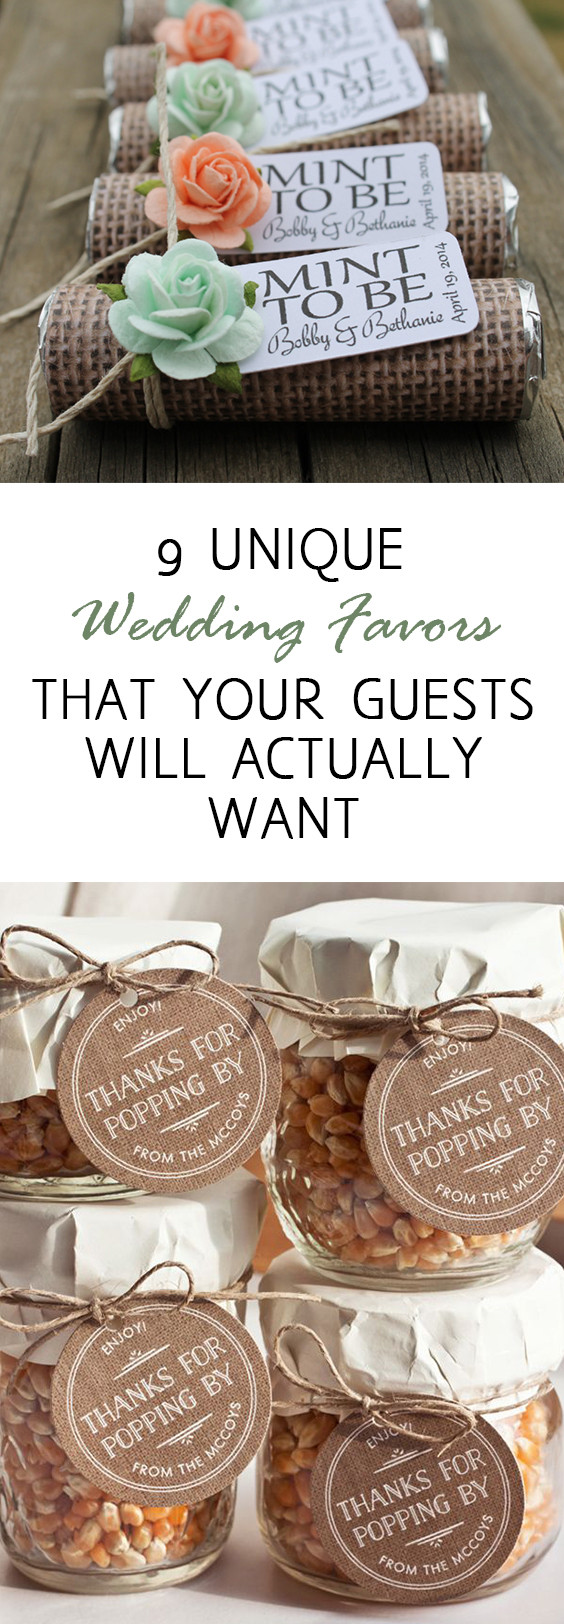 Wedding Party Favors Ideas
 9 Unique Wedding Favors that Your Guests Will Actually